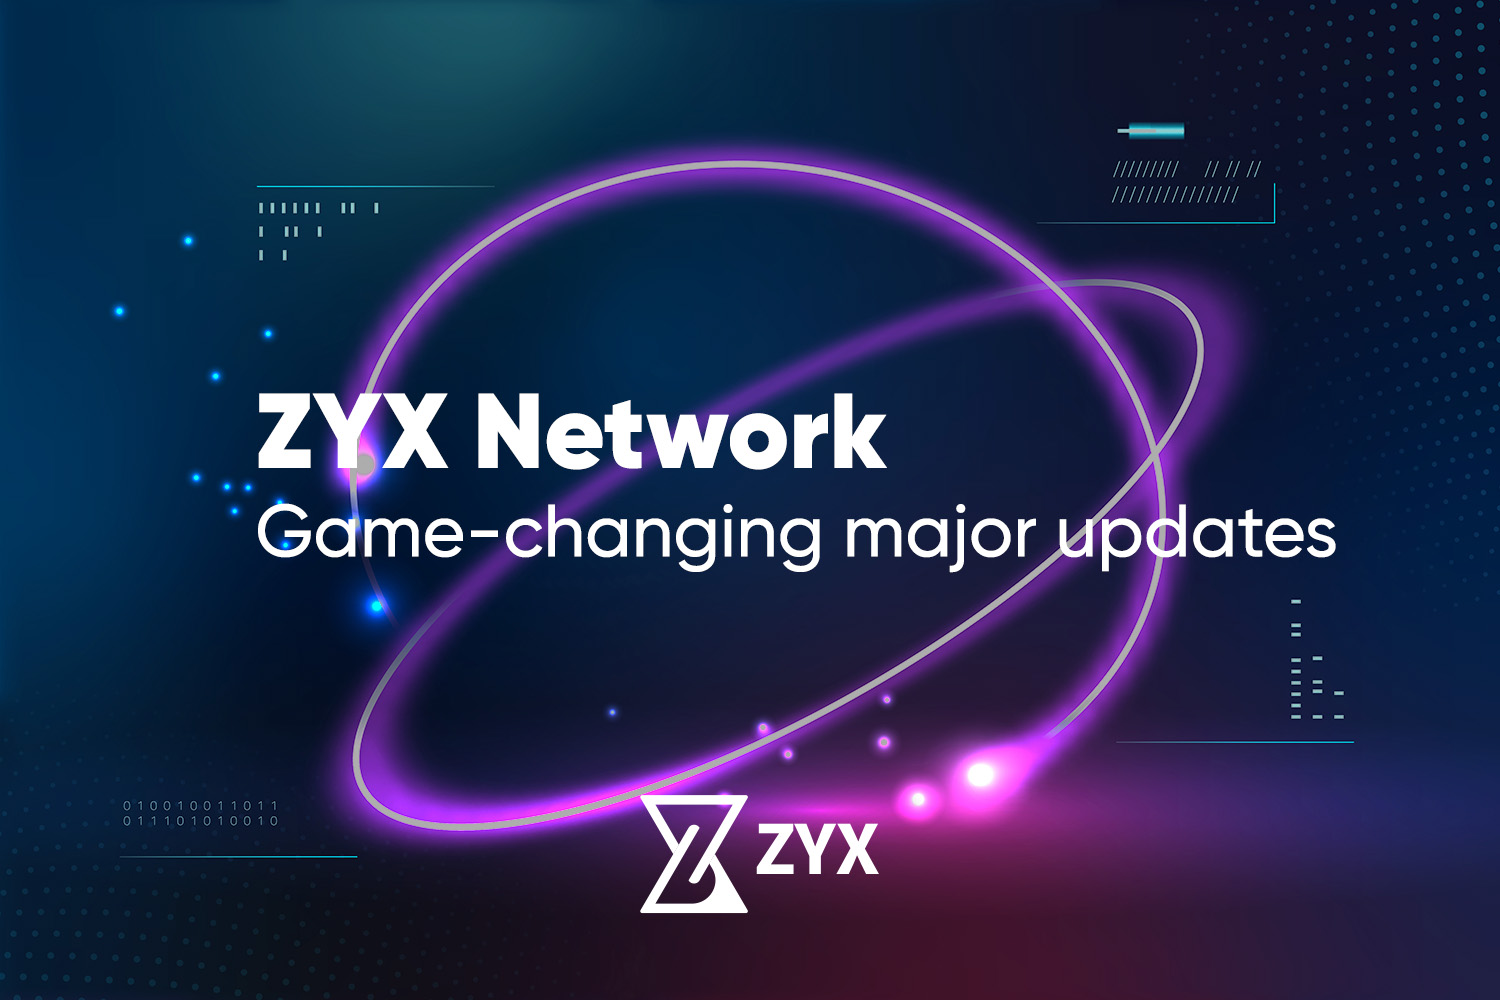 ZYX Network game-changing updates for the DeFi and crypto space.